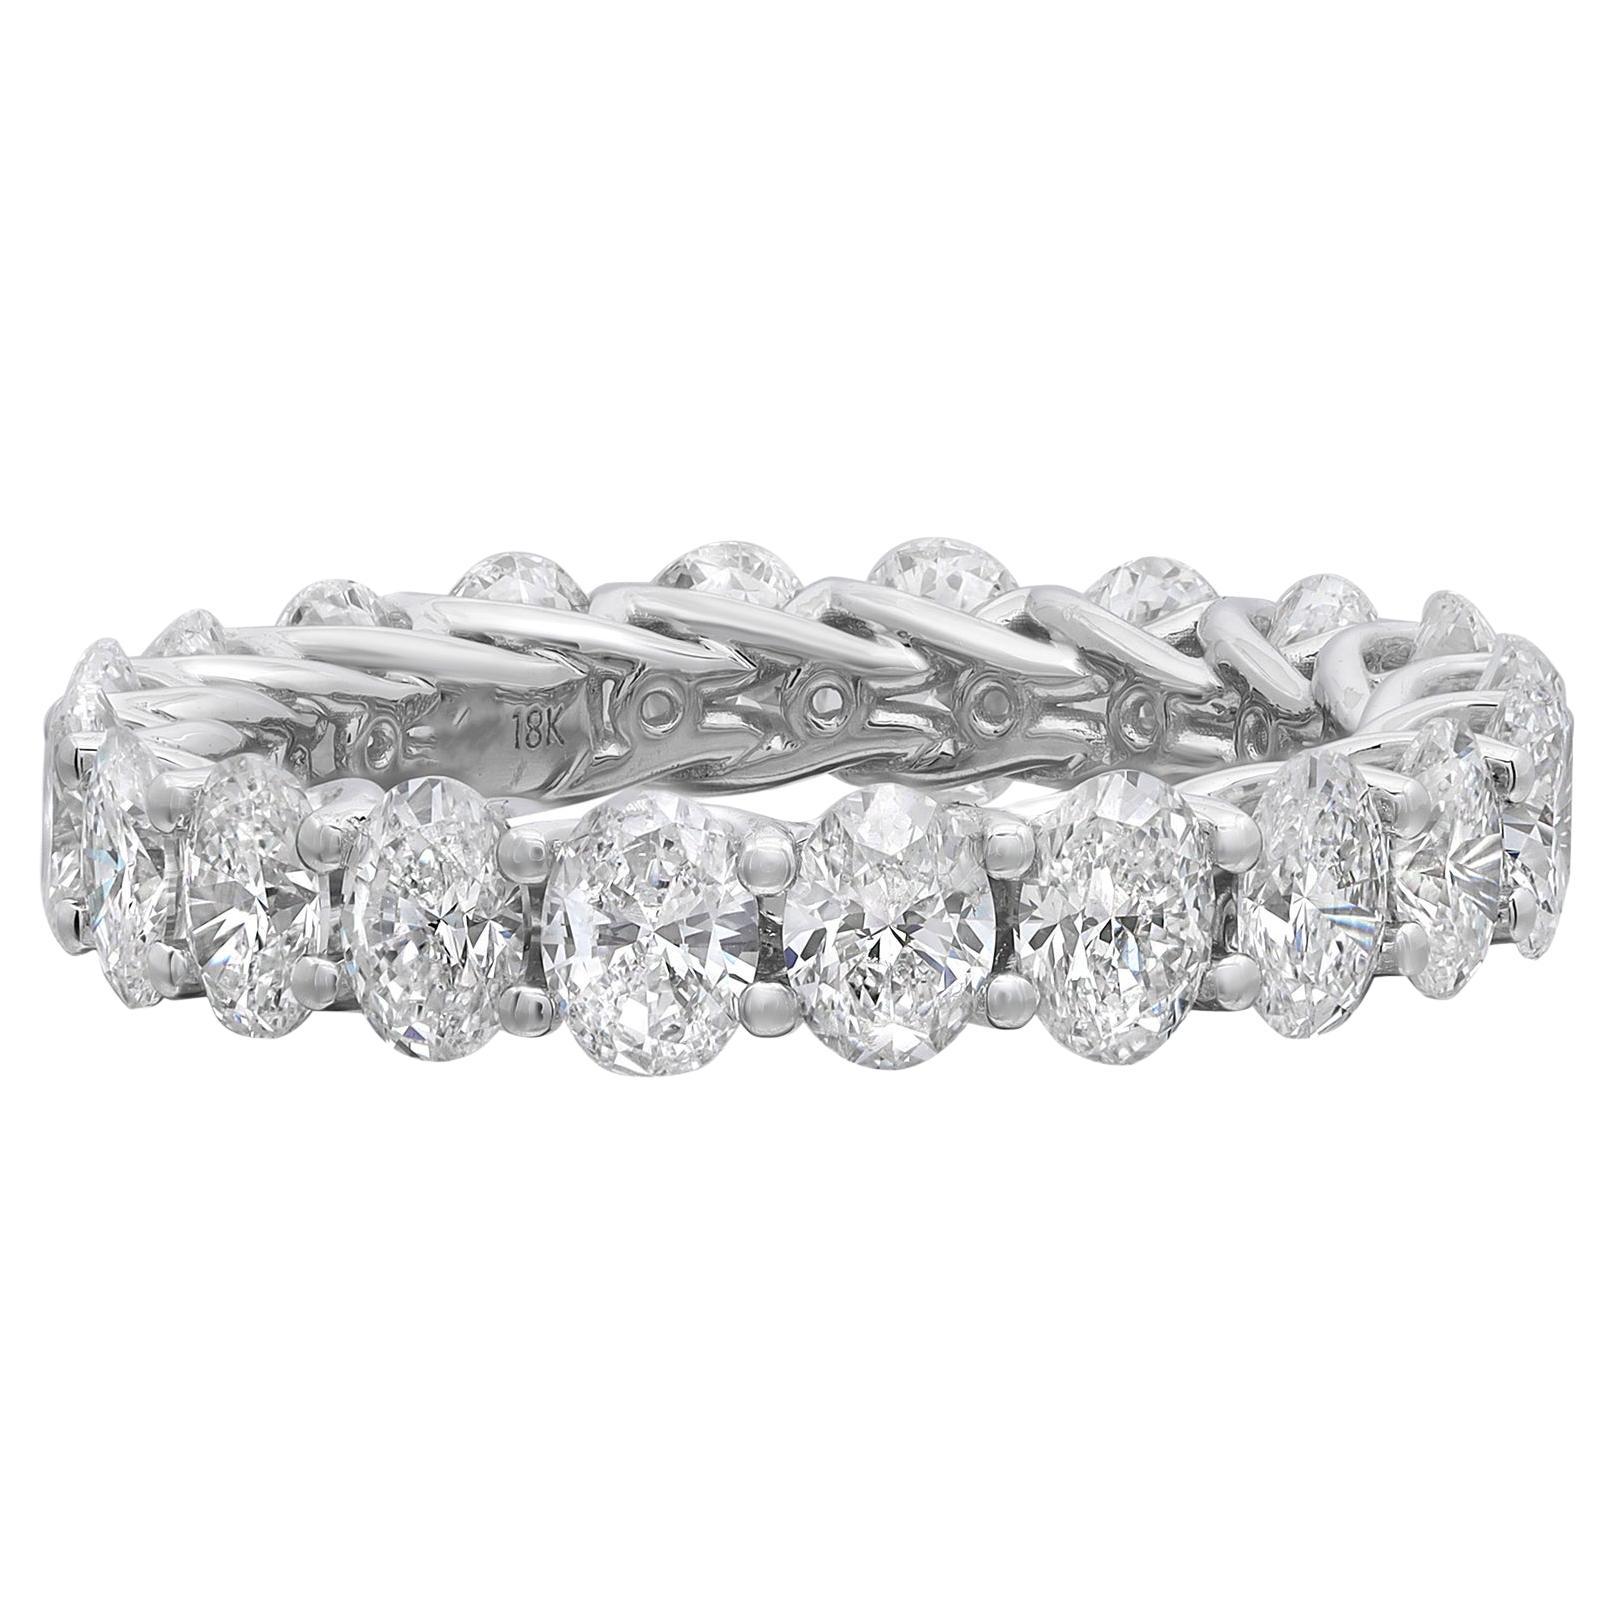 4.00Cttw Oval Cut Diamond Eternity Wedding Band Ring 18K White Gold For Sale